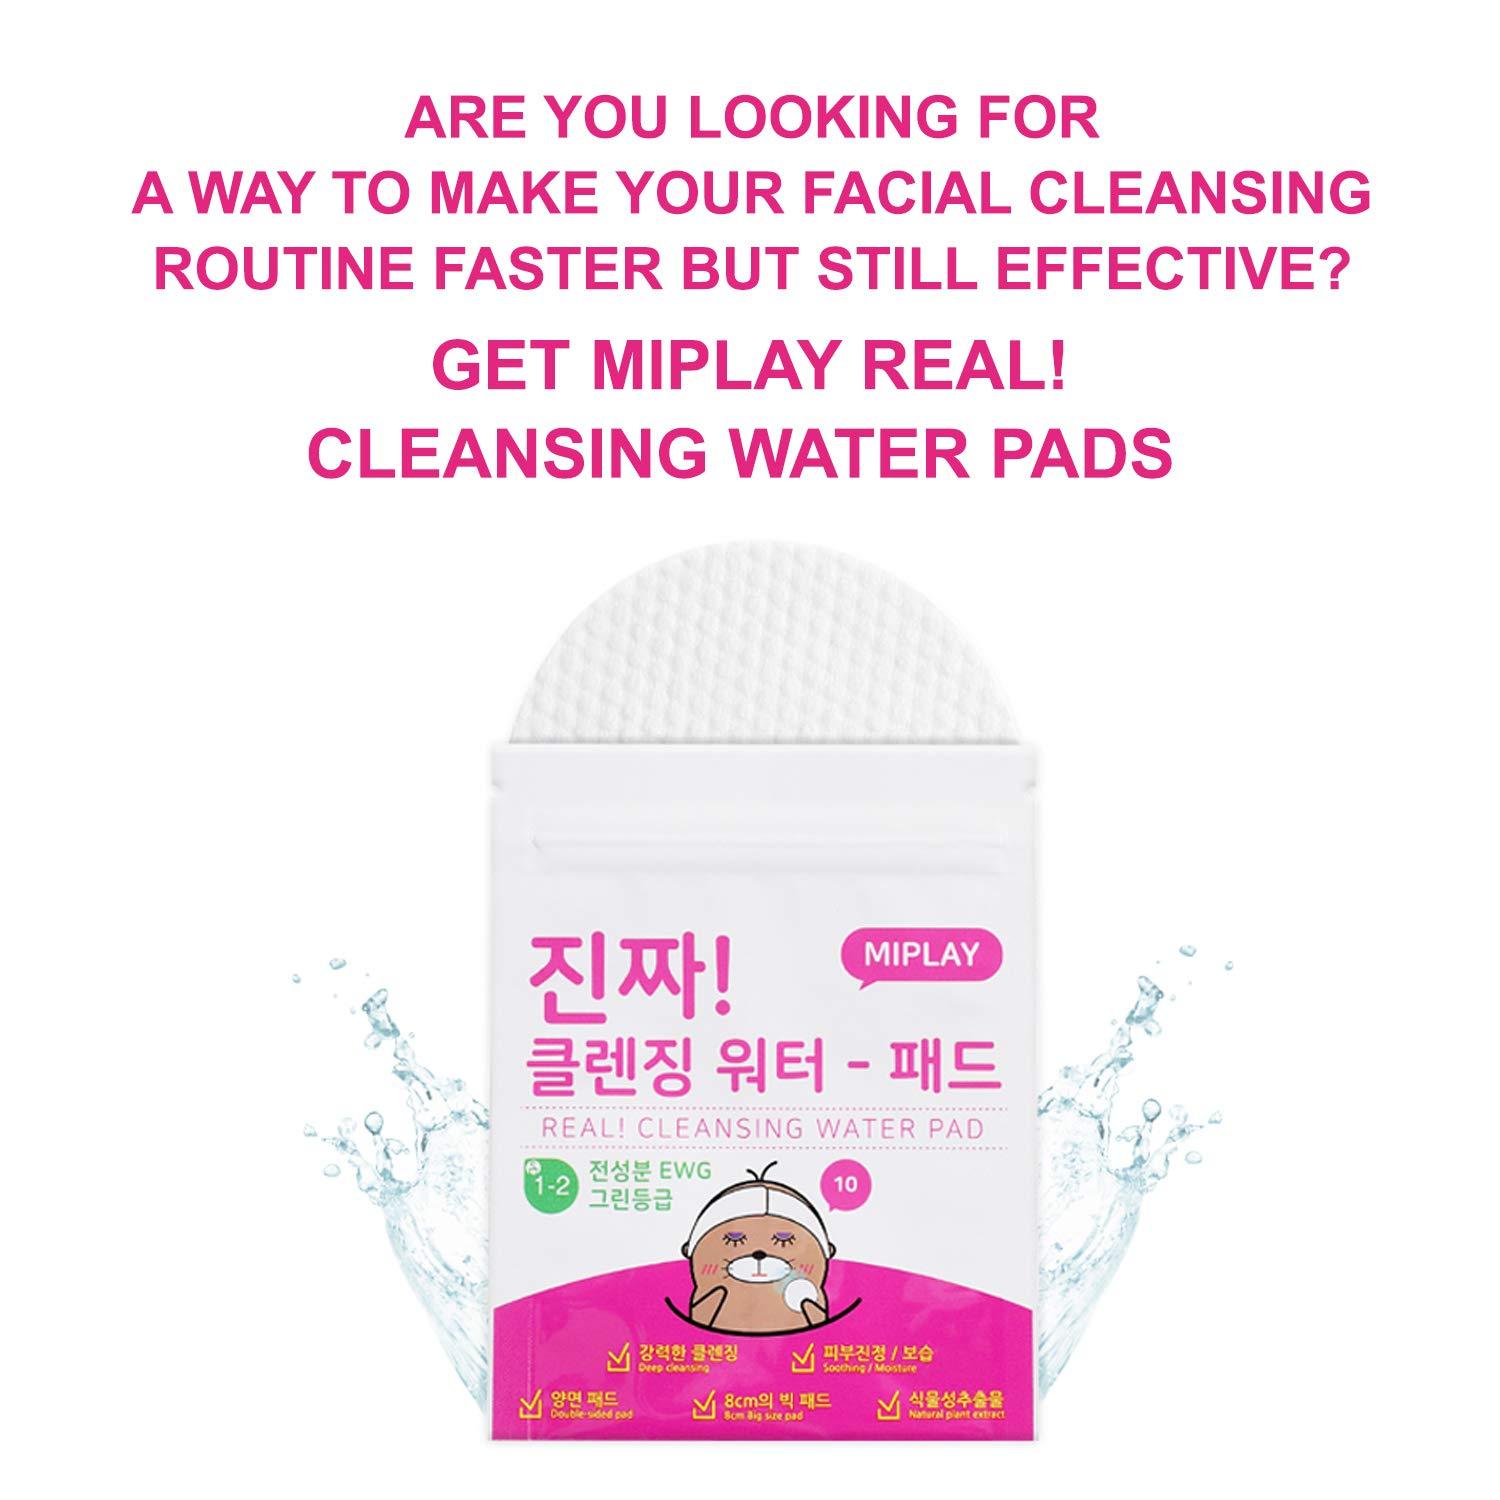 MIPLAY REAL! Cleansing water pad.